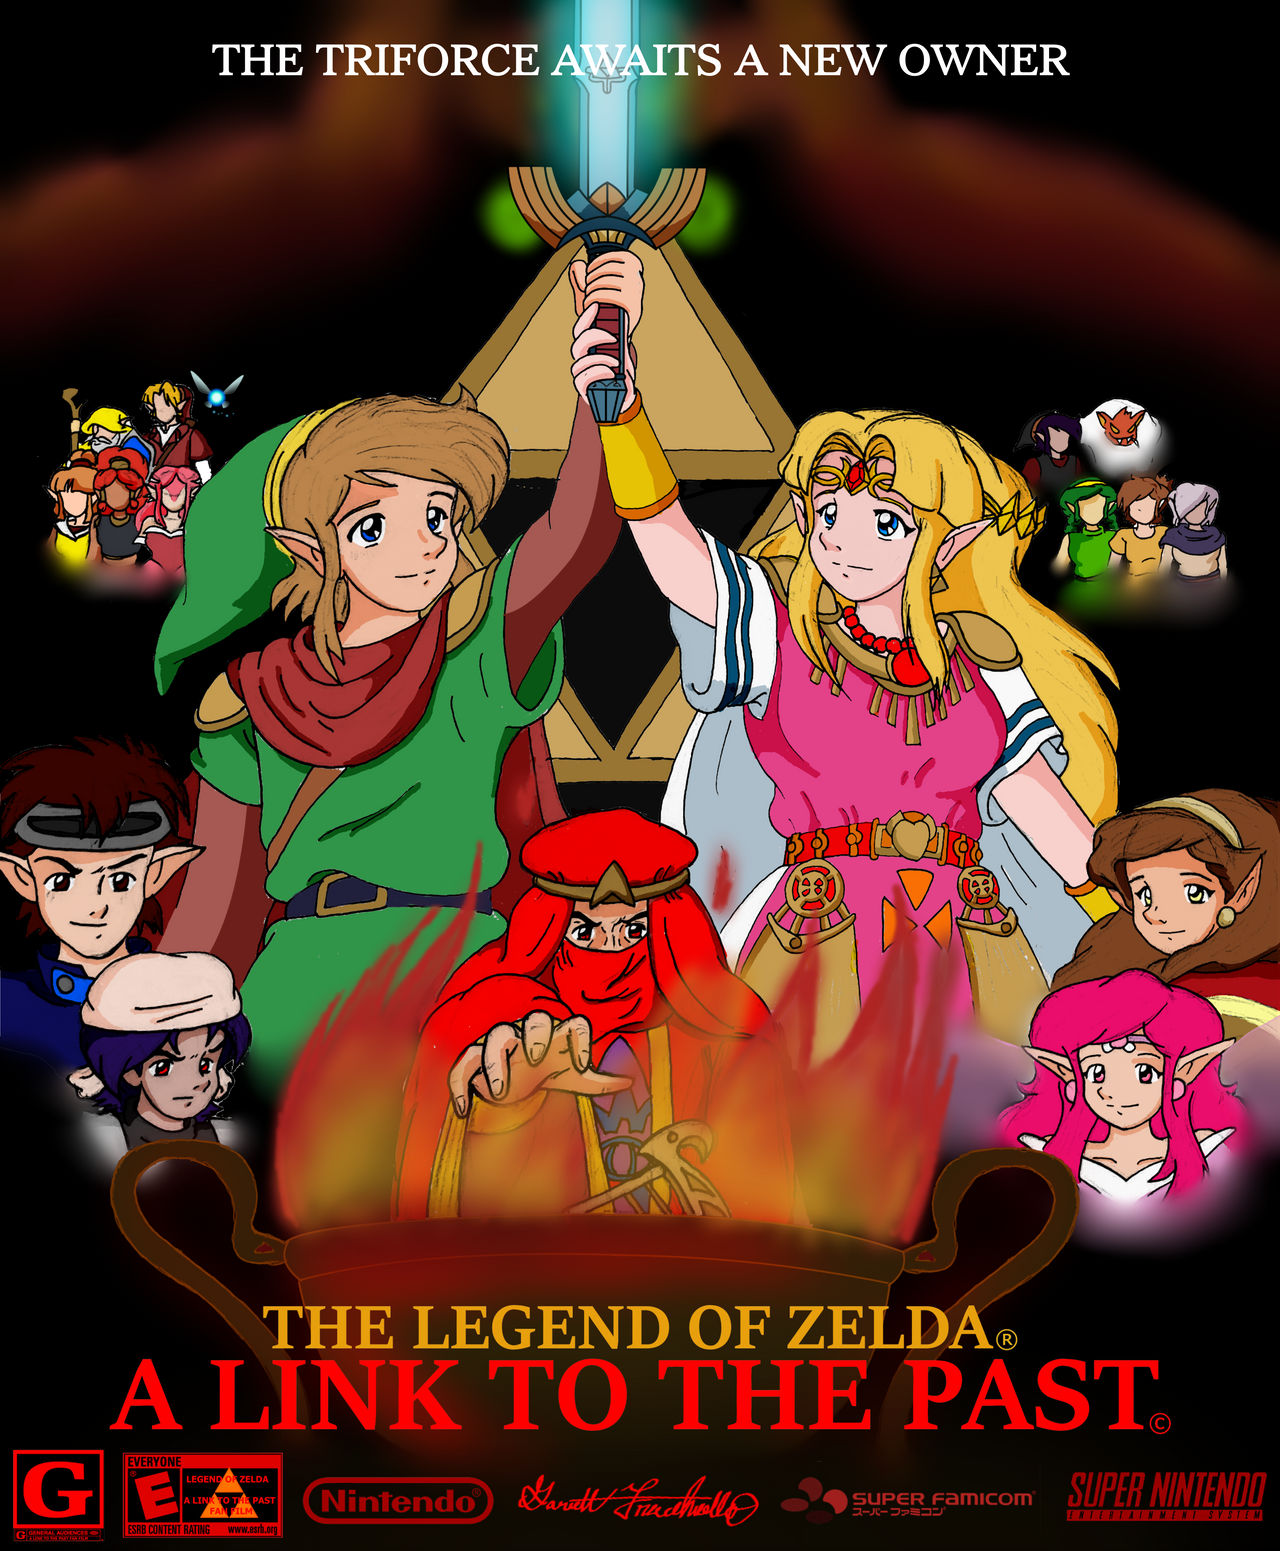 A Link to the Past: Retold